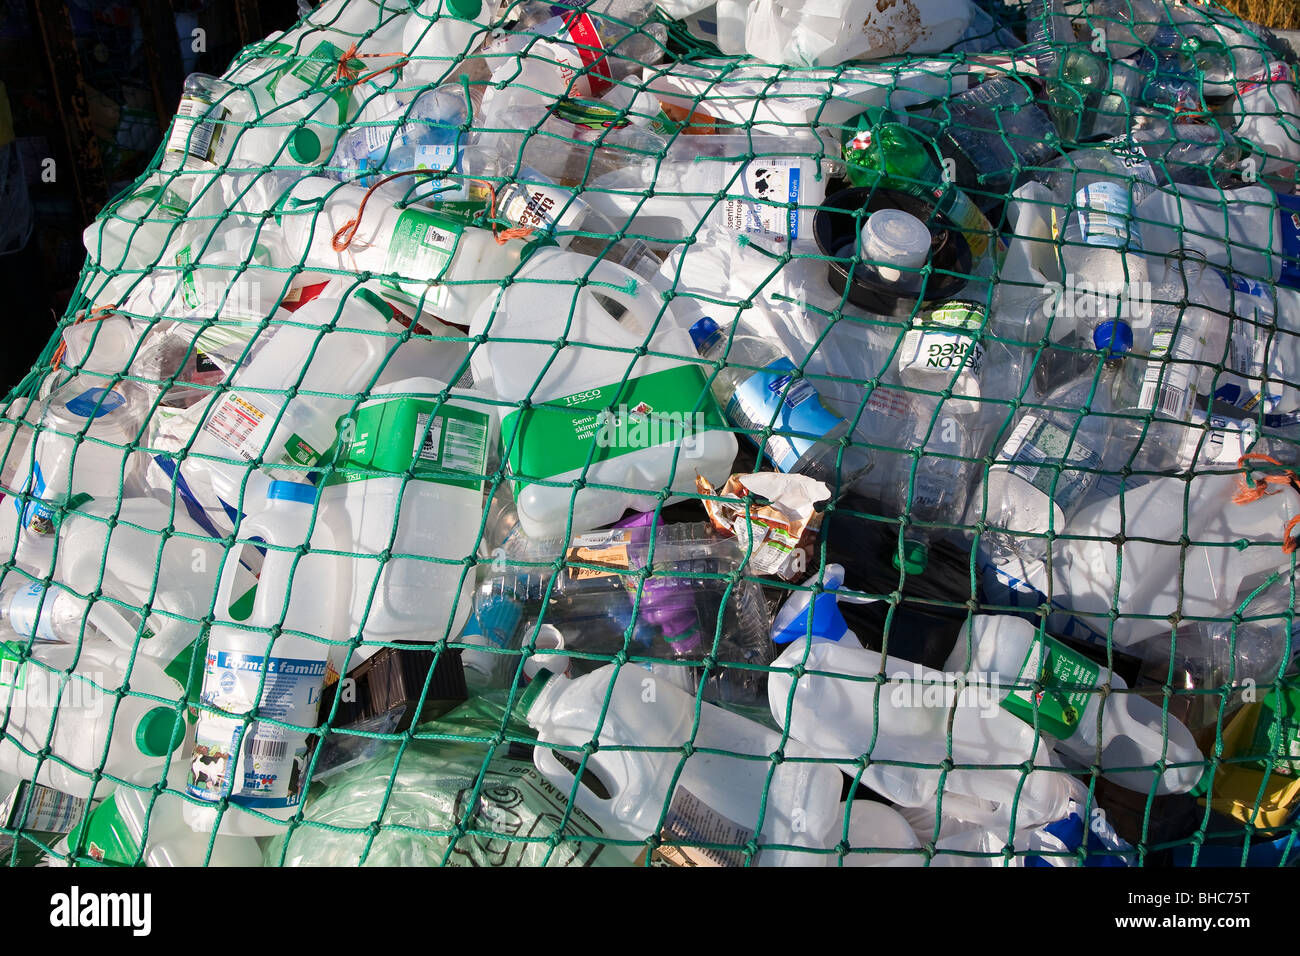 Plastic waste for recycling at recycling collection station in car park UK Stock Photo